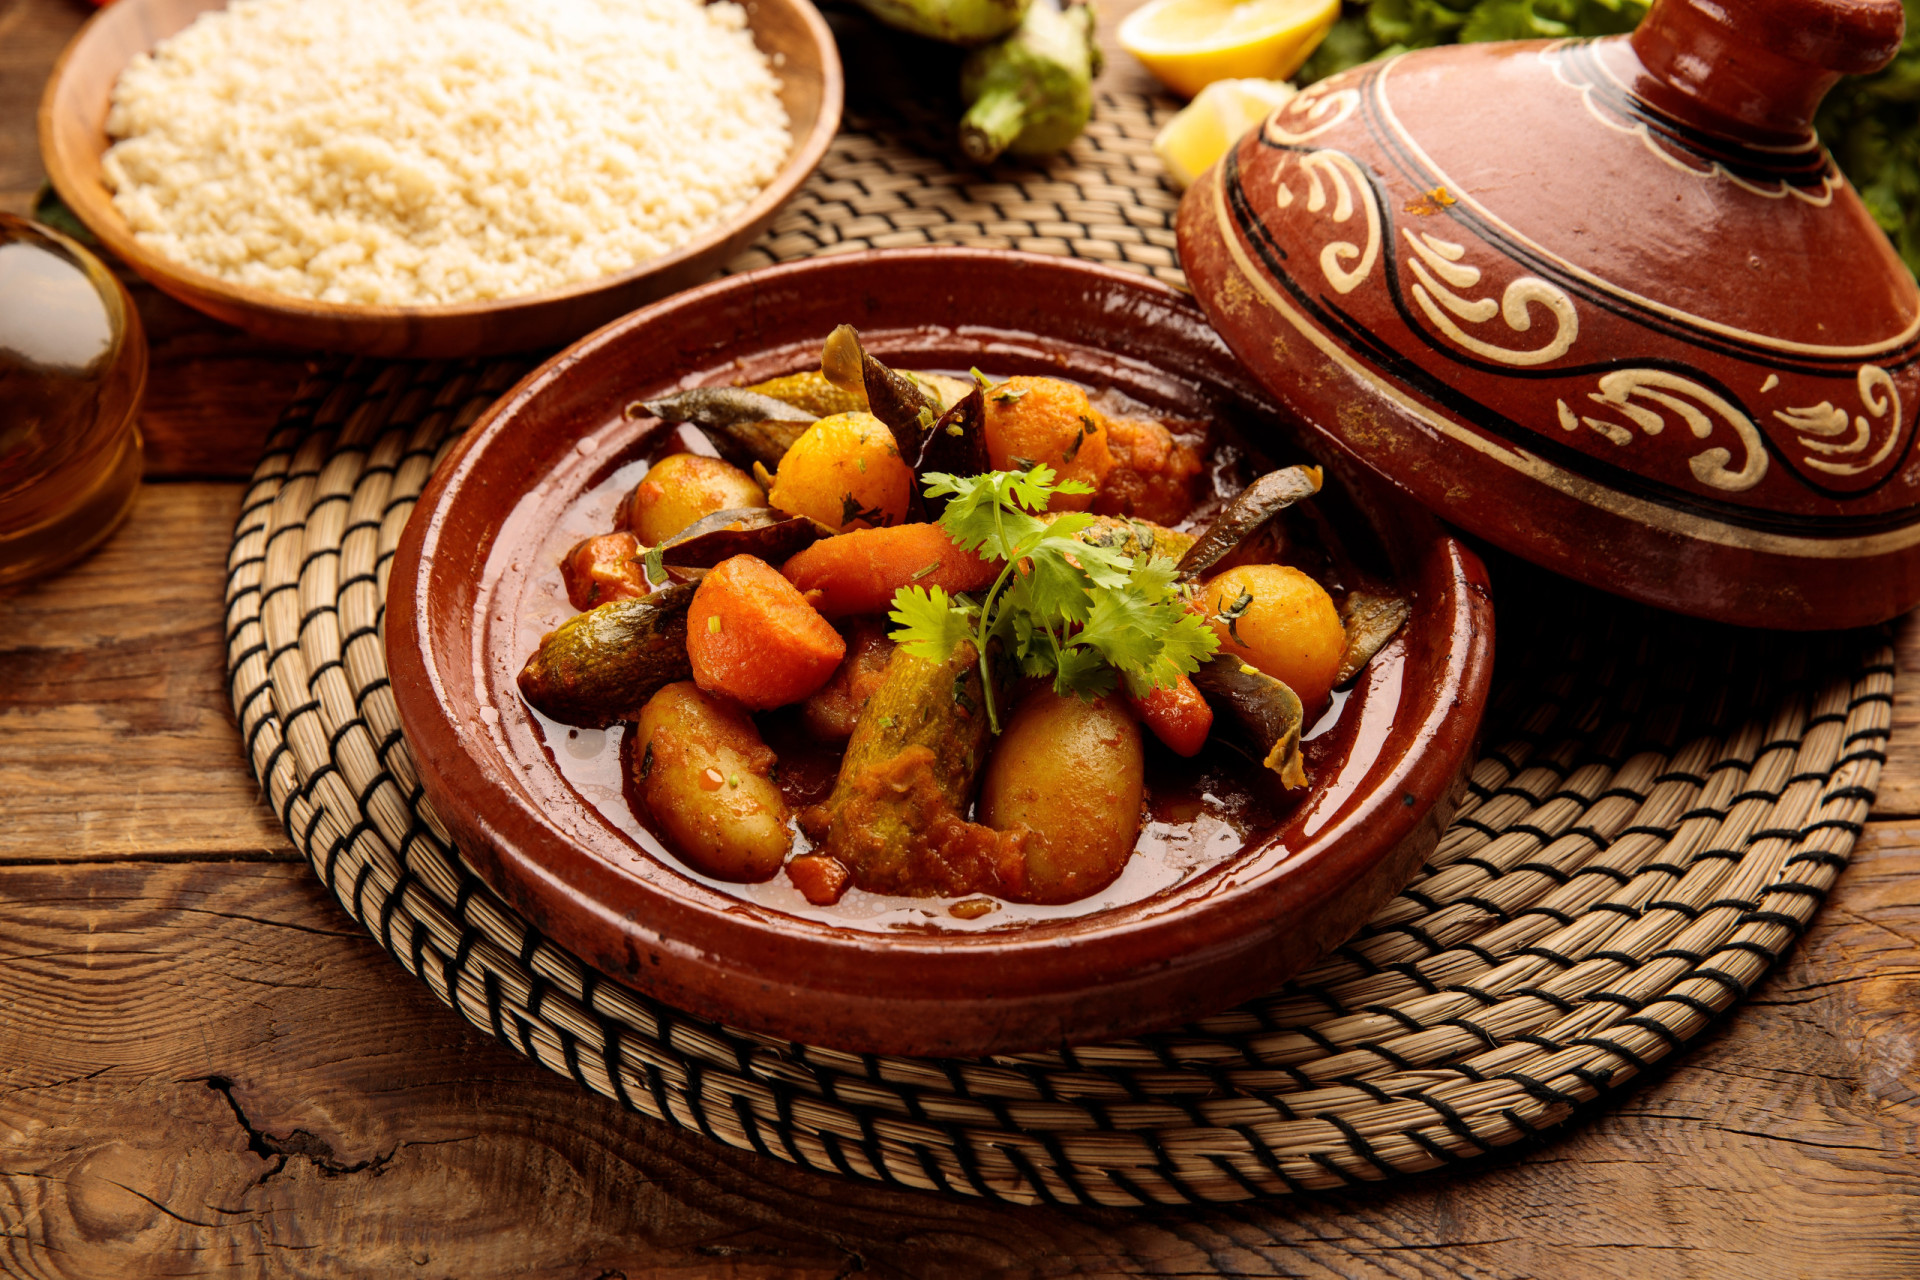 <p><span>A tagine is a stew named after the clay pot in which </span><span>it's prepared</span><span>. The stew typically features meat, vegetables, and sweet and spicy flavors.</span></p><p><a href="https://www.msn.com/en-us/community/channel/vid-7xx8mnucu55yw63we9va2gwr7uihbxwc68fxqp25x6tg4ftibpra?cvid=94631541bc0f4f89bfd59158d696ad7e">Follow us and access great exclusive content every day</a></p>